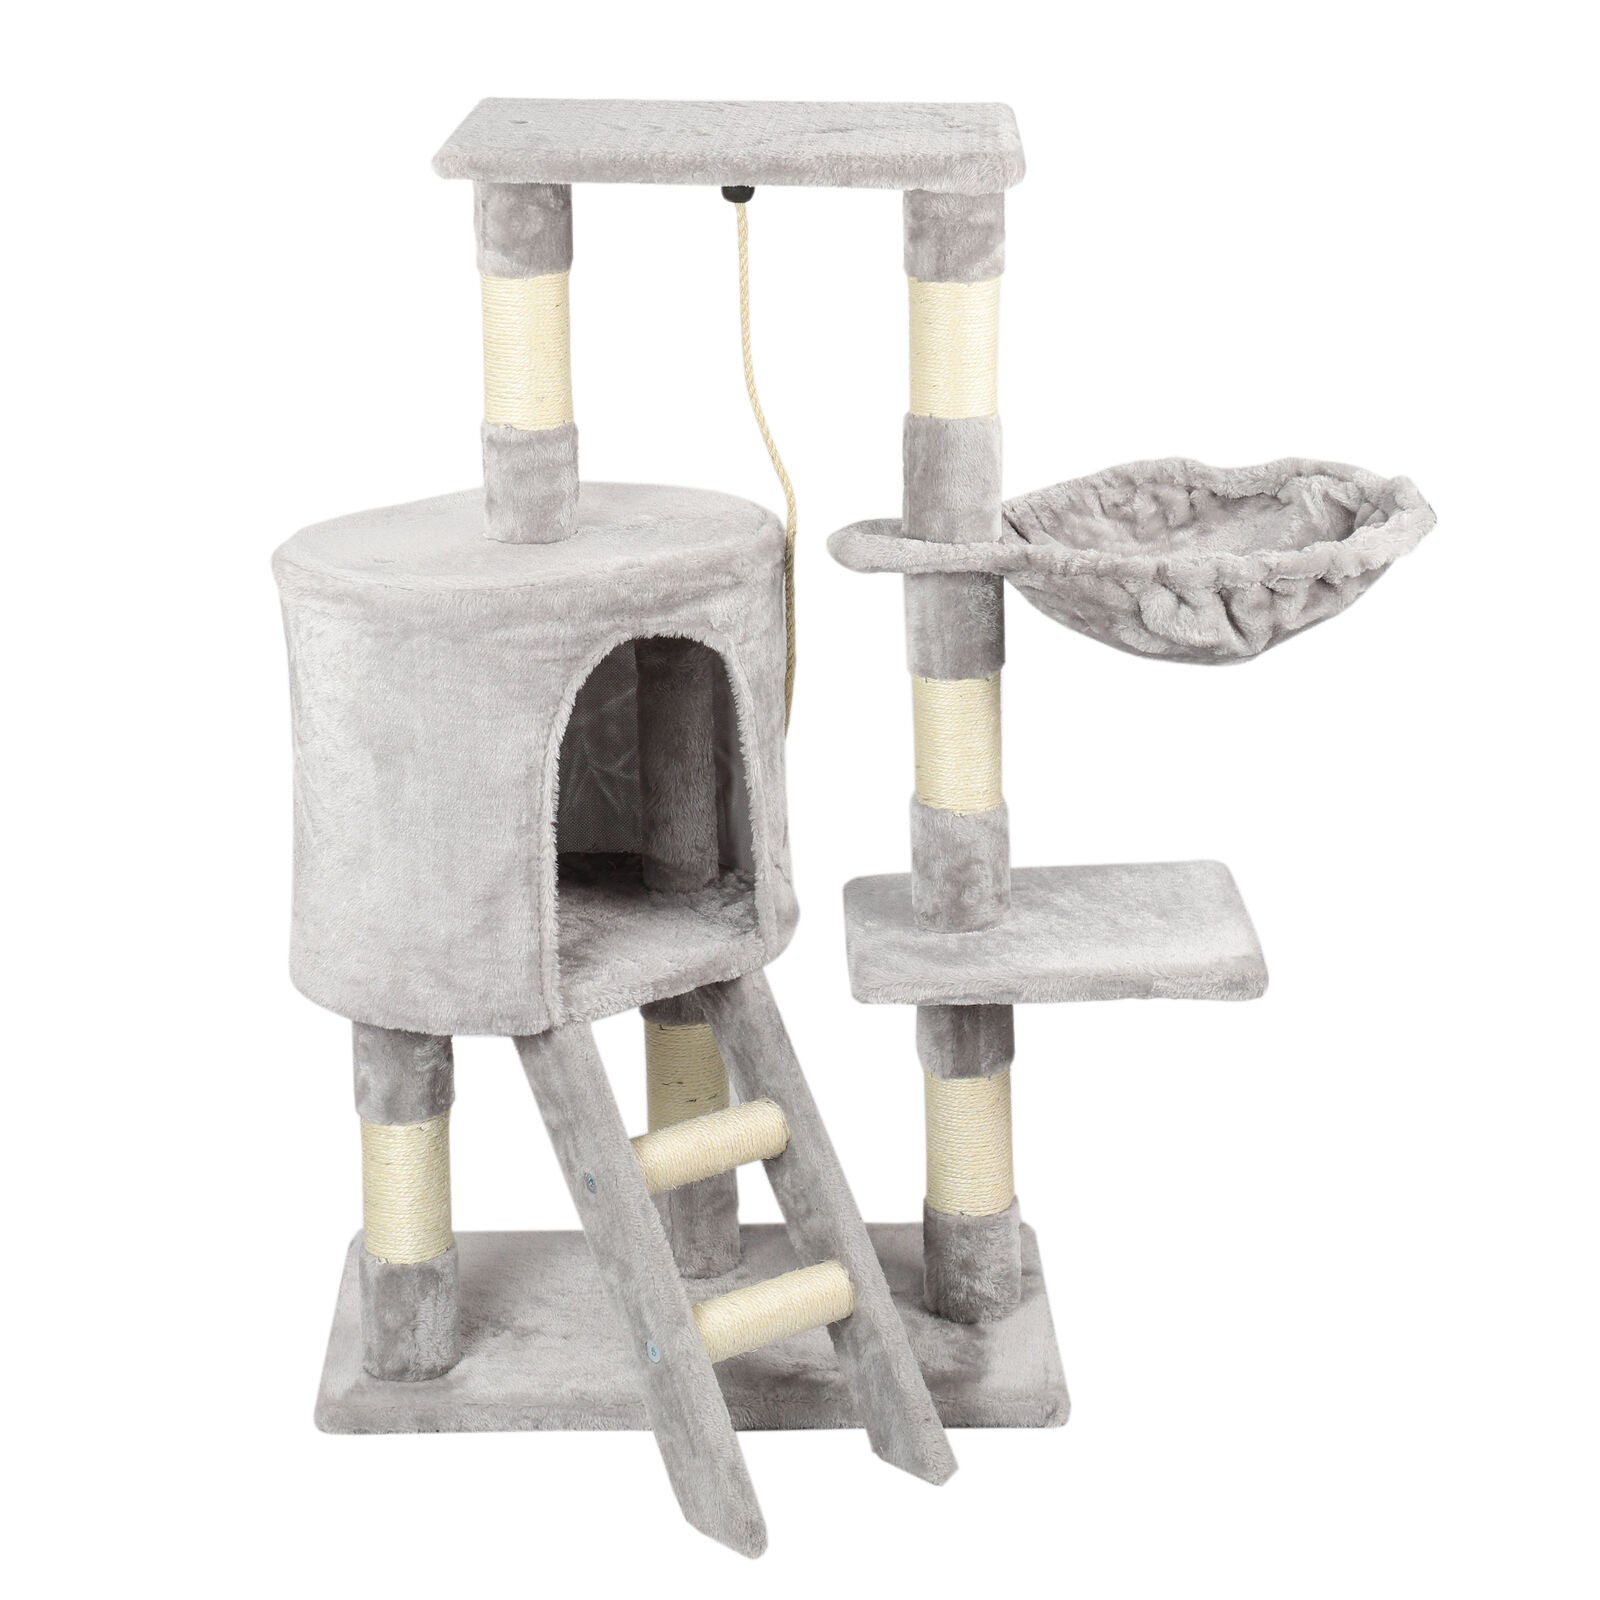 Large Cat Tree Activity Centre Climbing Tower Multilevel Scratching Post